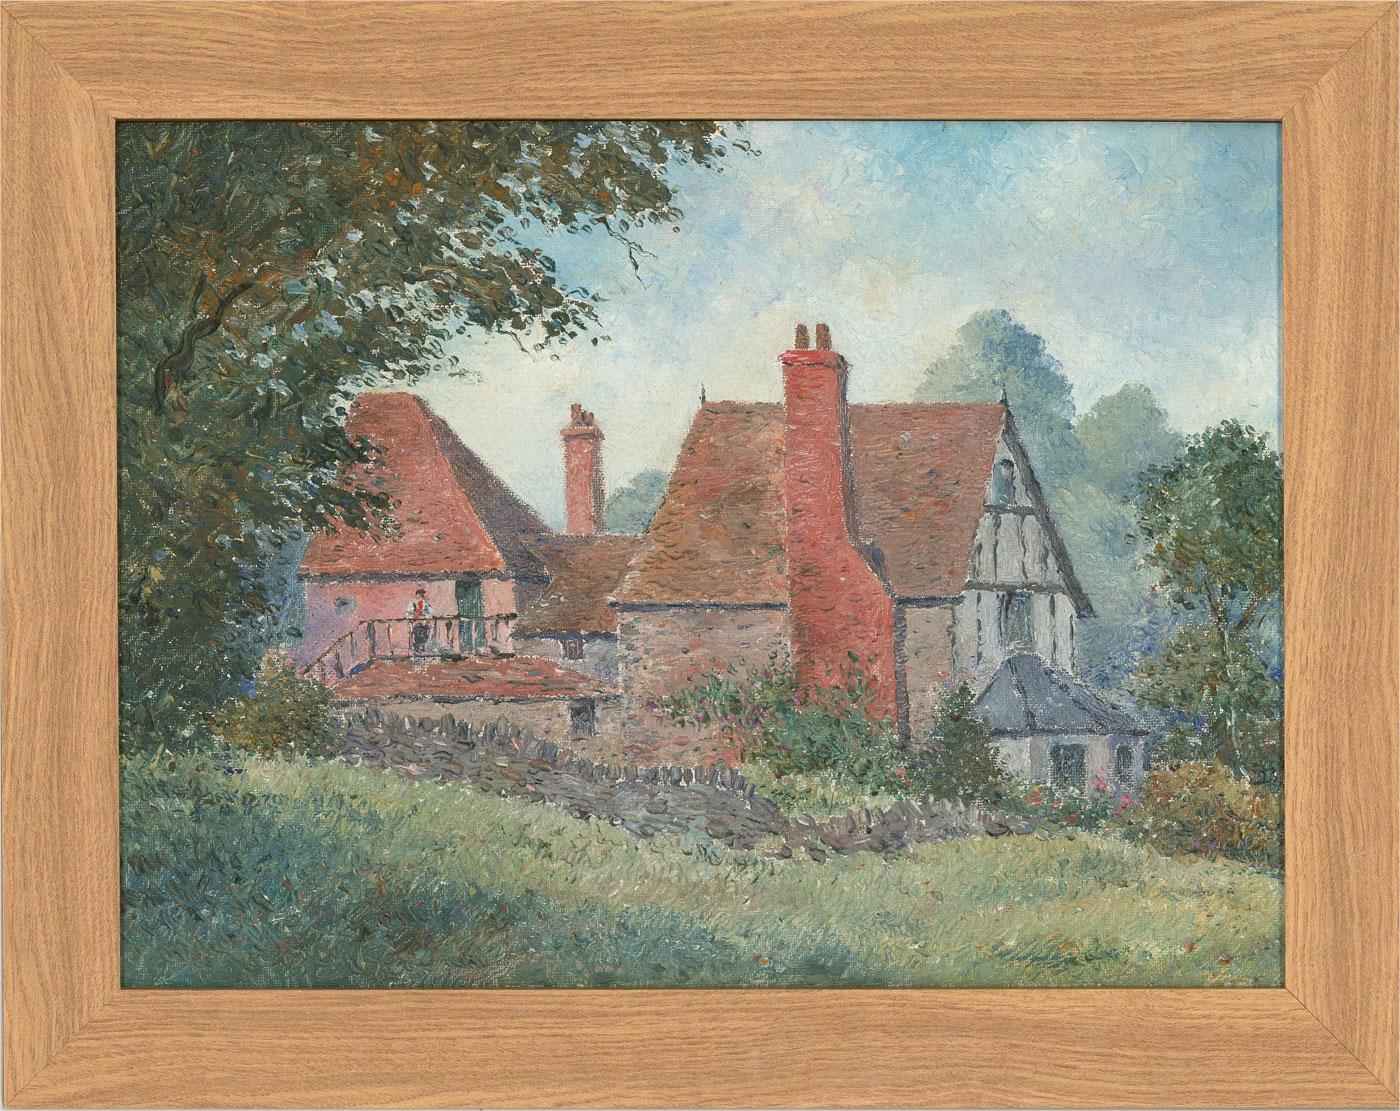 A wonderful impressionist study by John Weston Gough, depicting stone cottages in a landscape. Well presented in an oak effect frame. Unsigned. On canvas board.
